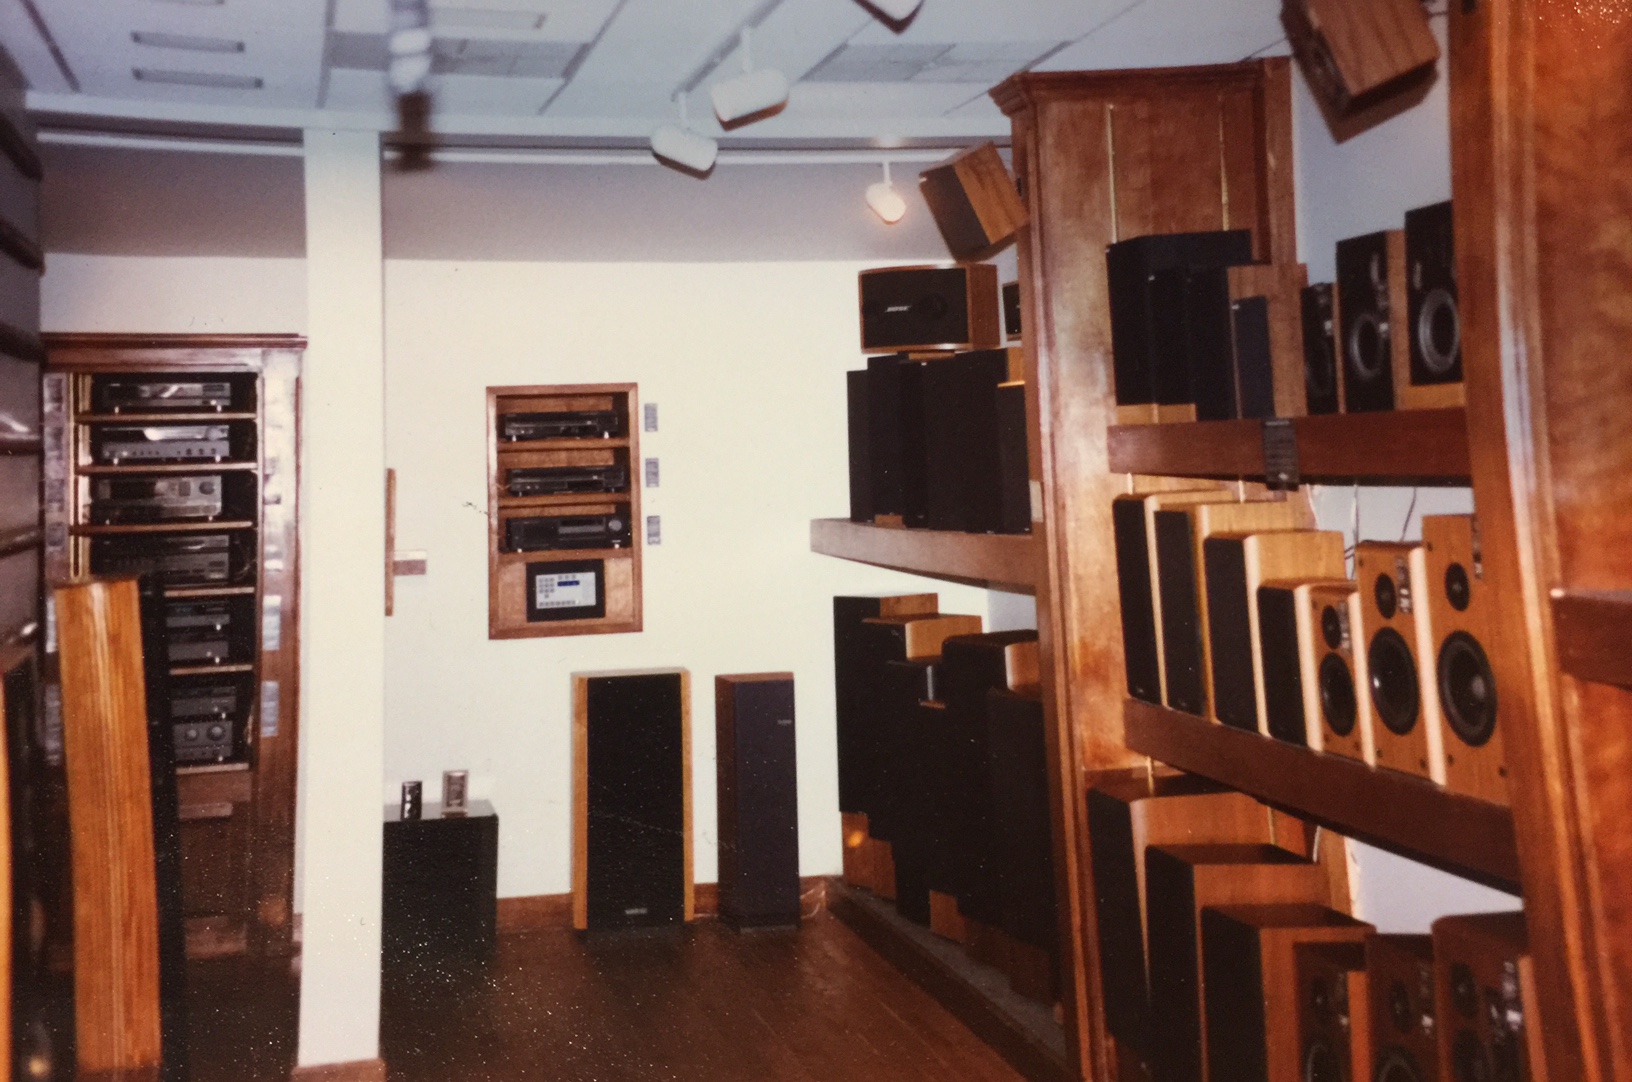 Vintage Stereo Store Photos